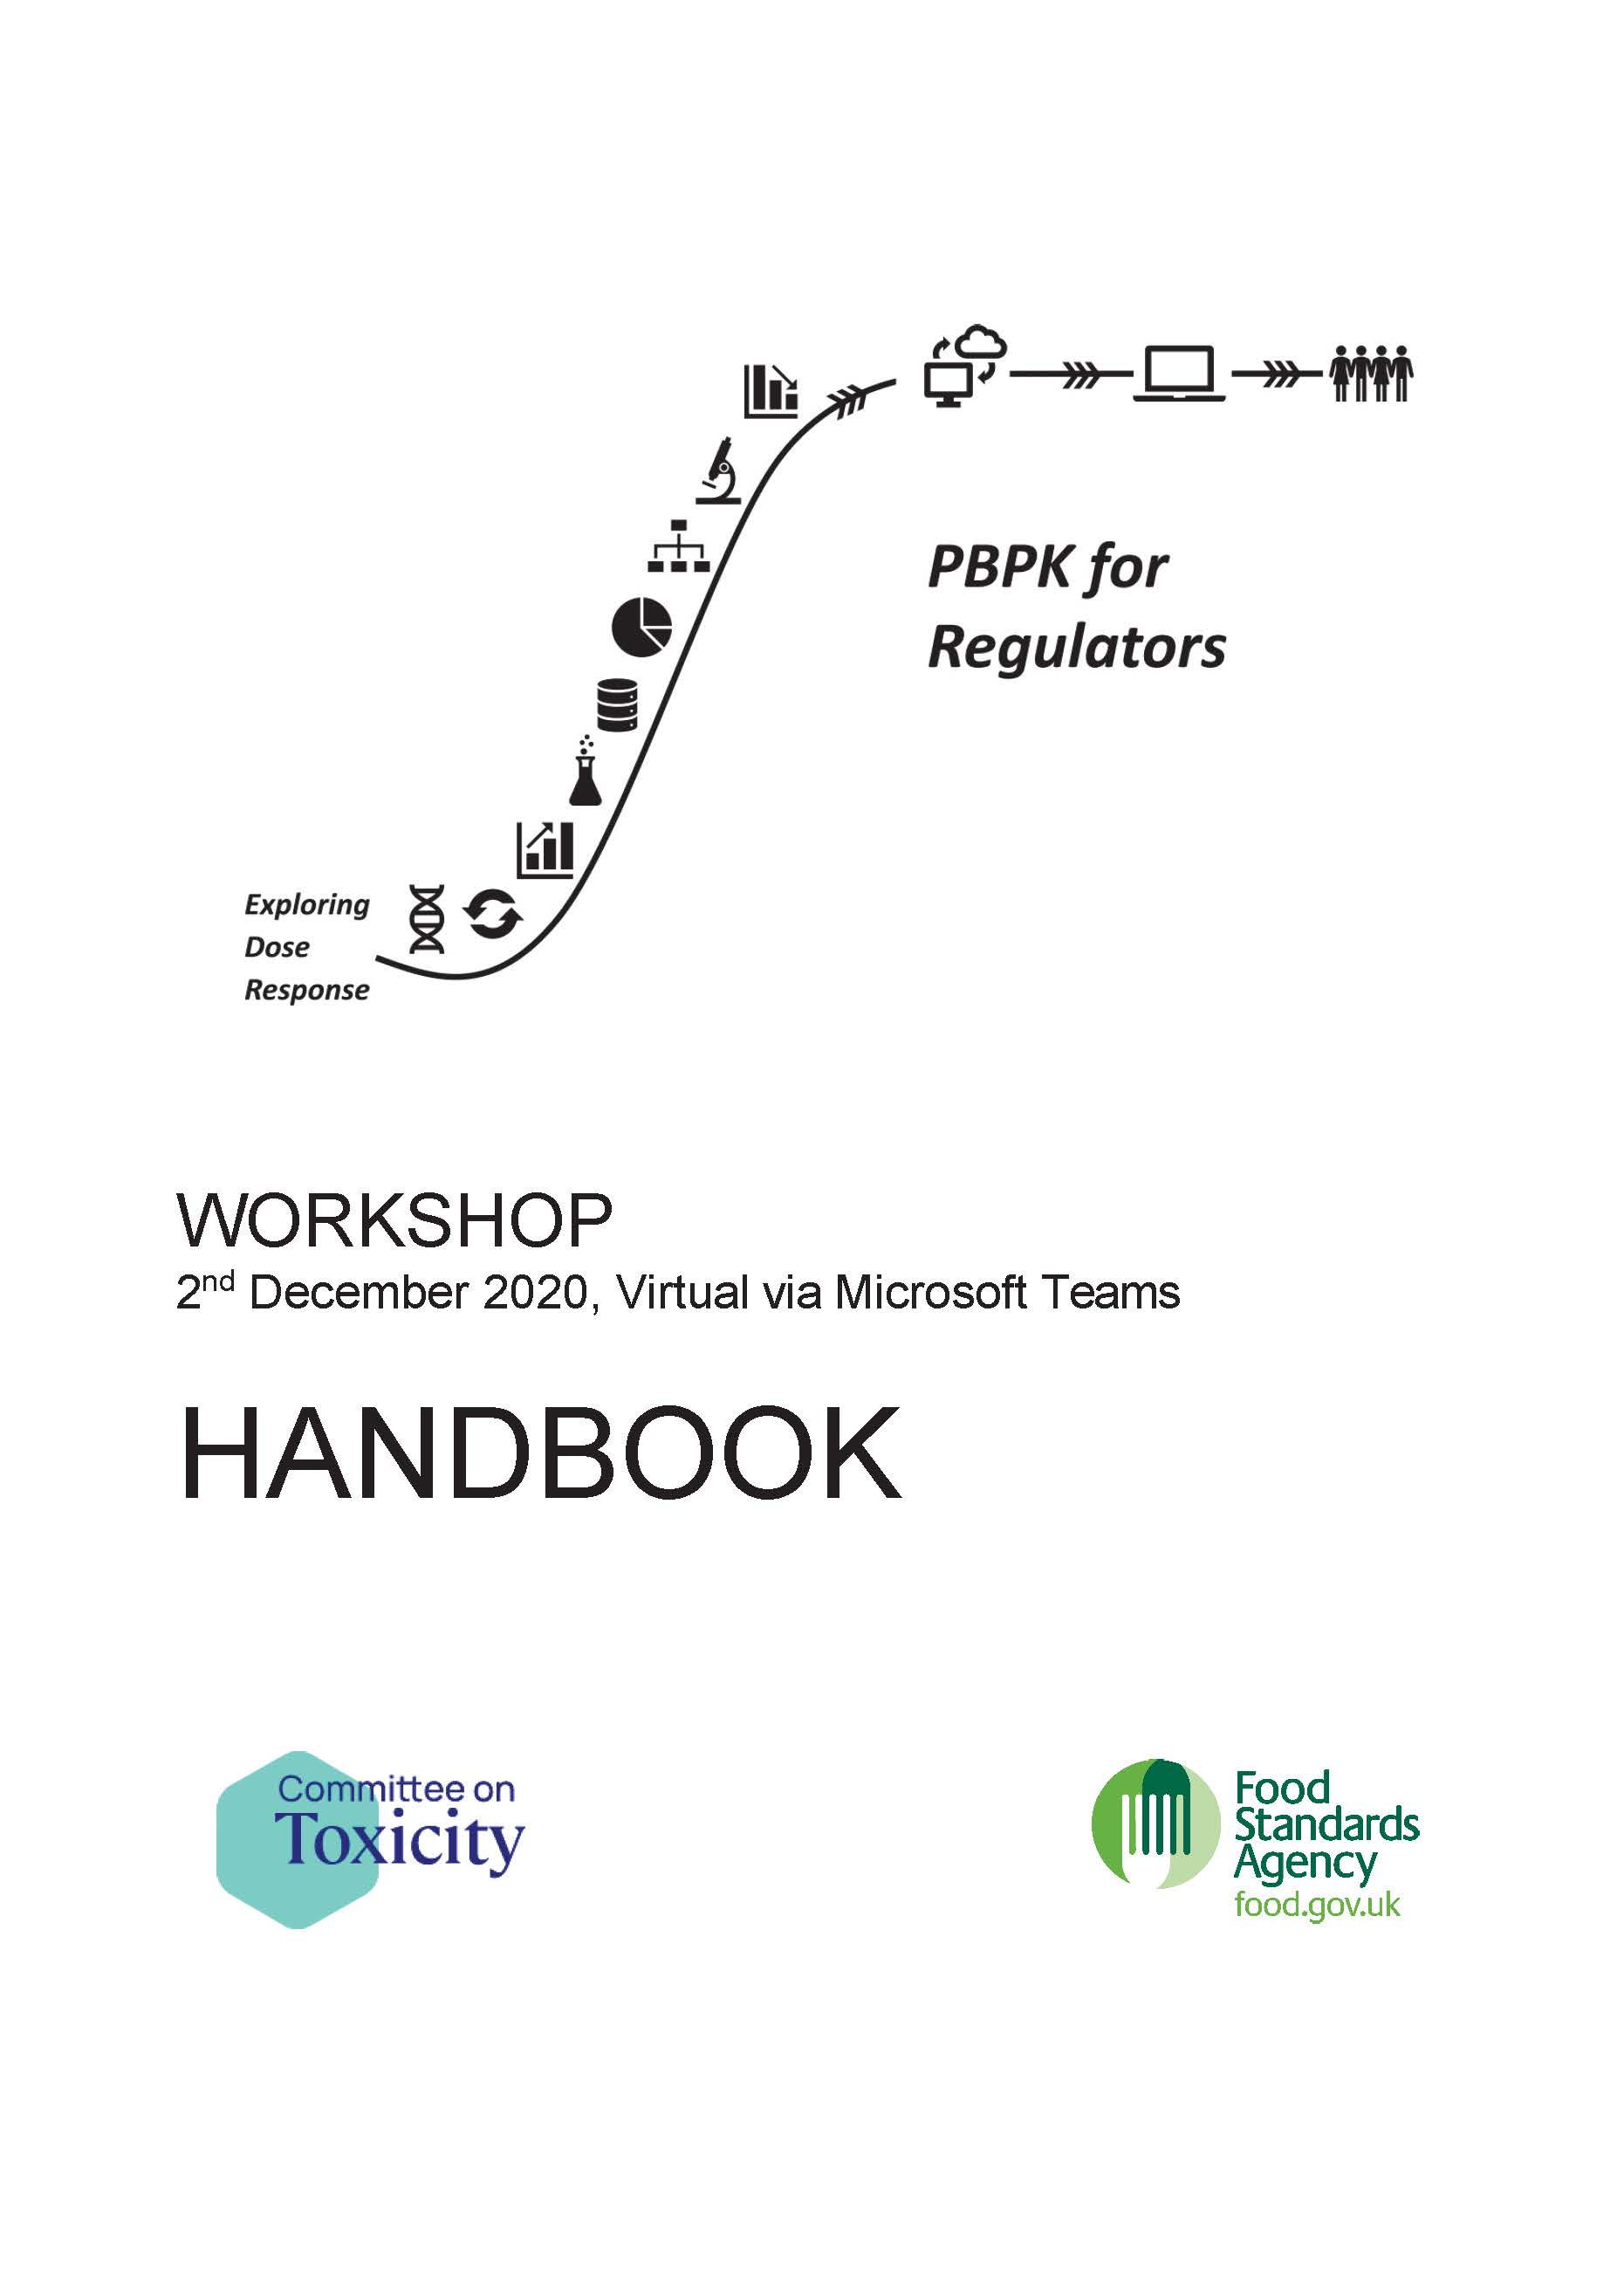 The cover page shows a black and white picture representation of PBPK for regulators and exploring dose response.  Below this is the date and location of the workshop with the COT and FSA logo's .